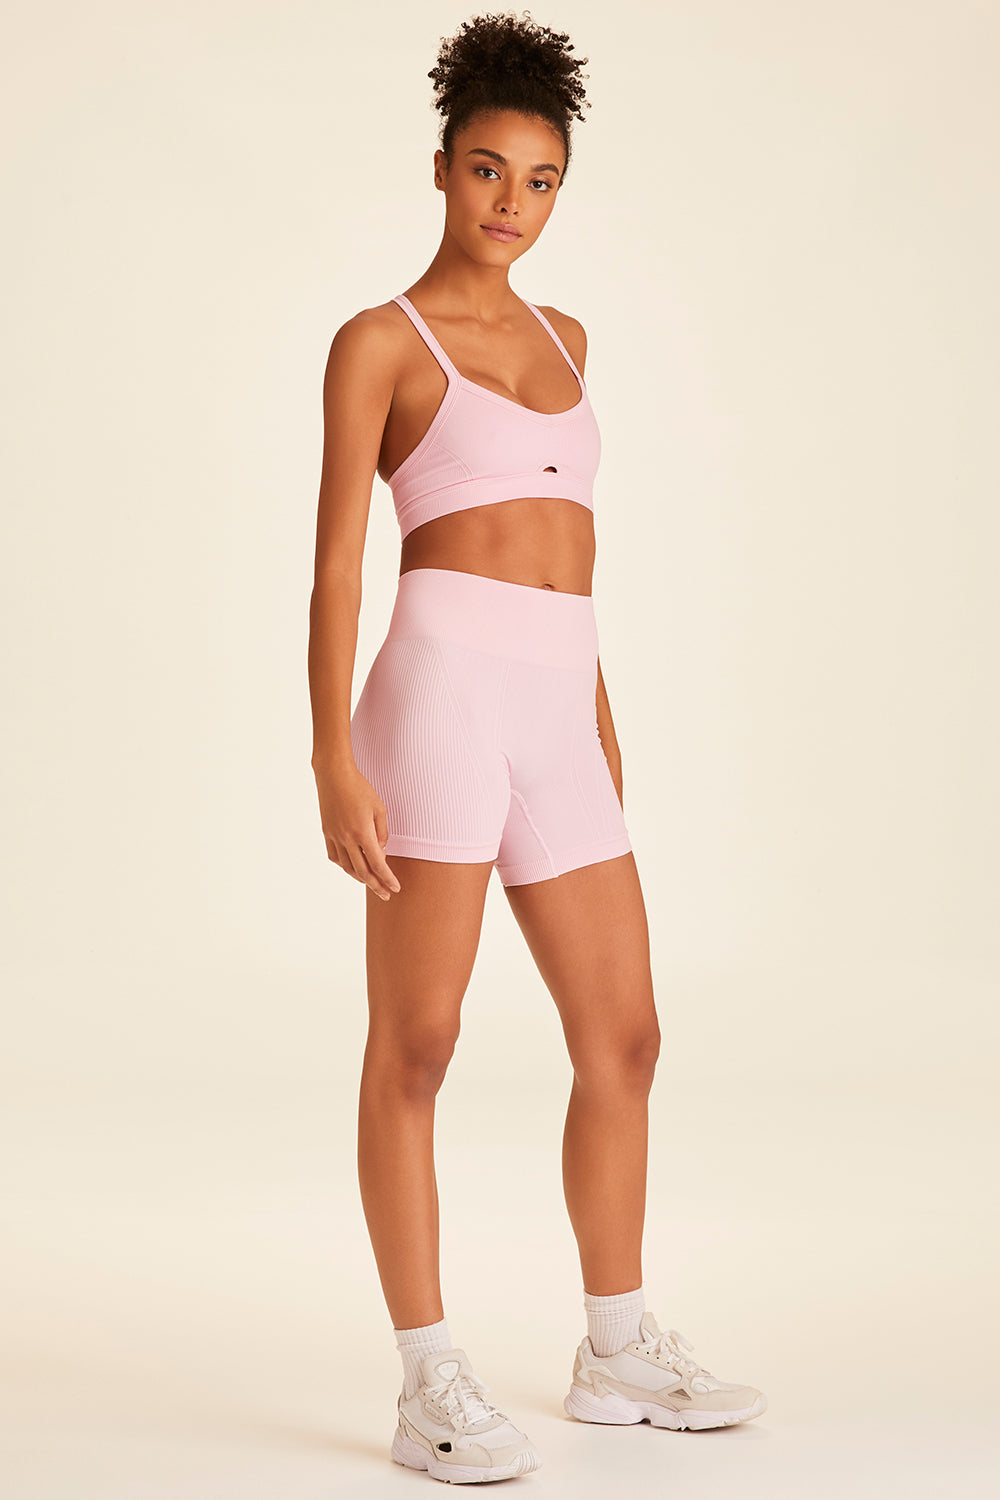 Alala Barre Seamless Short in Powder Pink for women